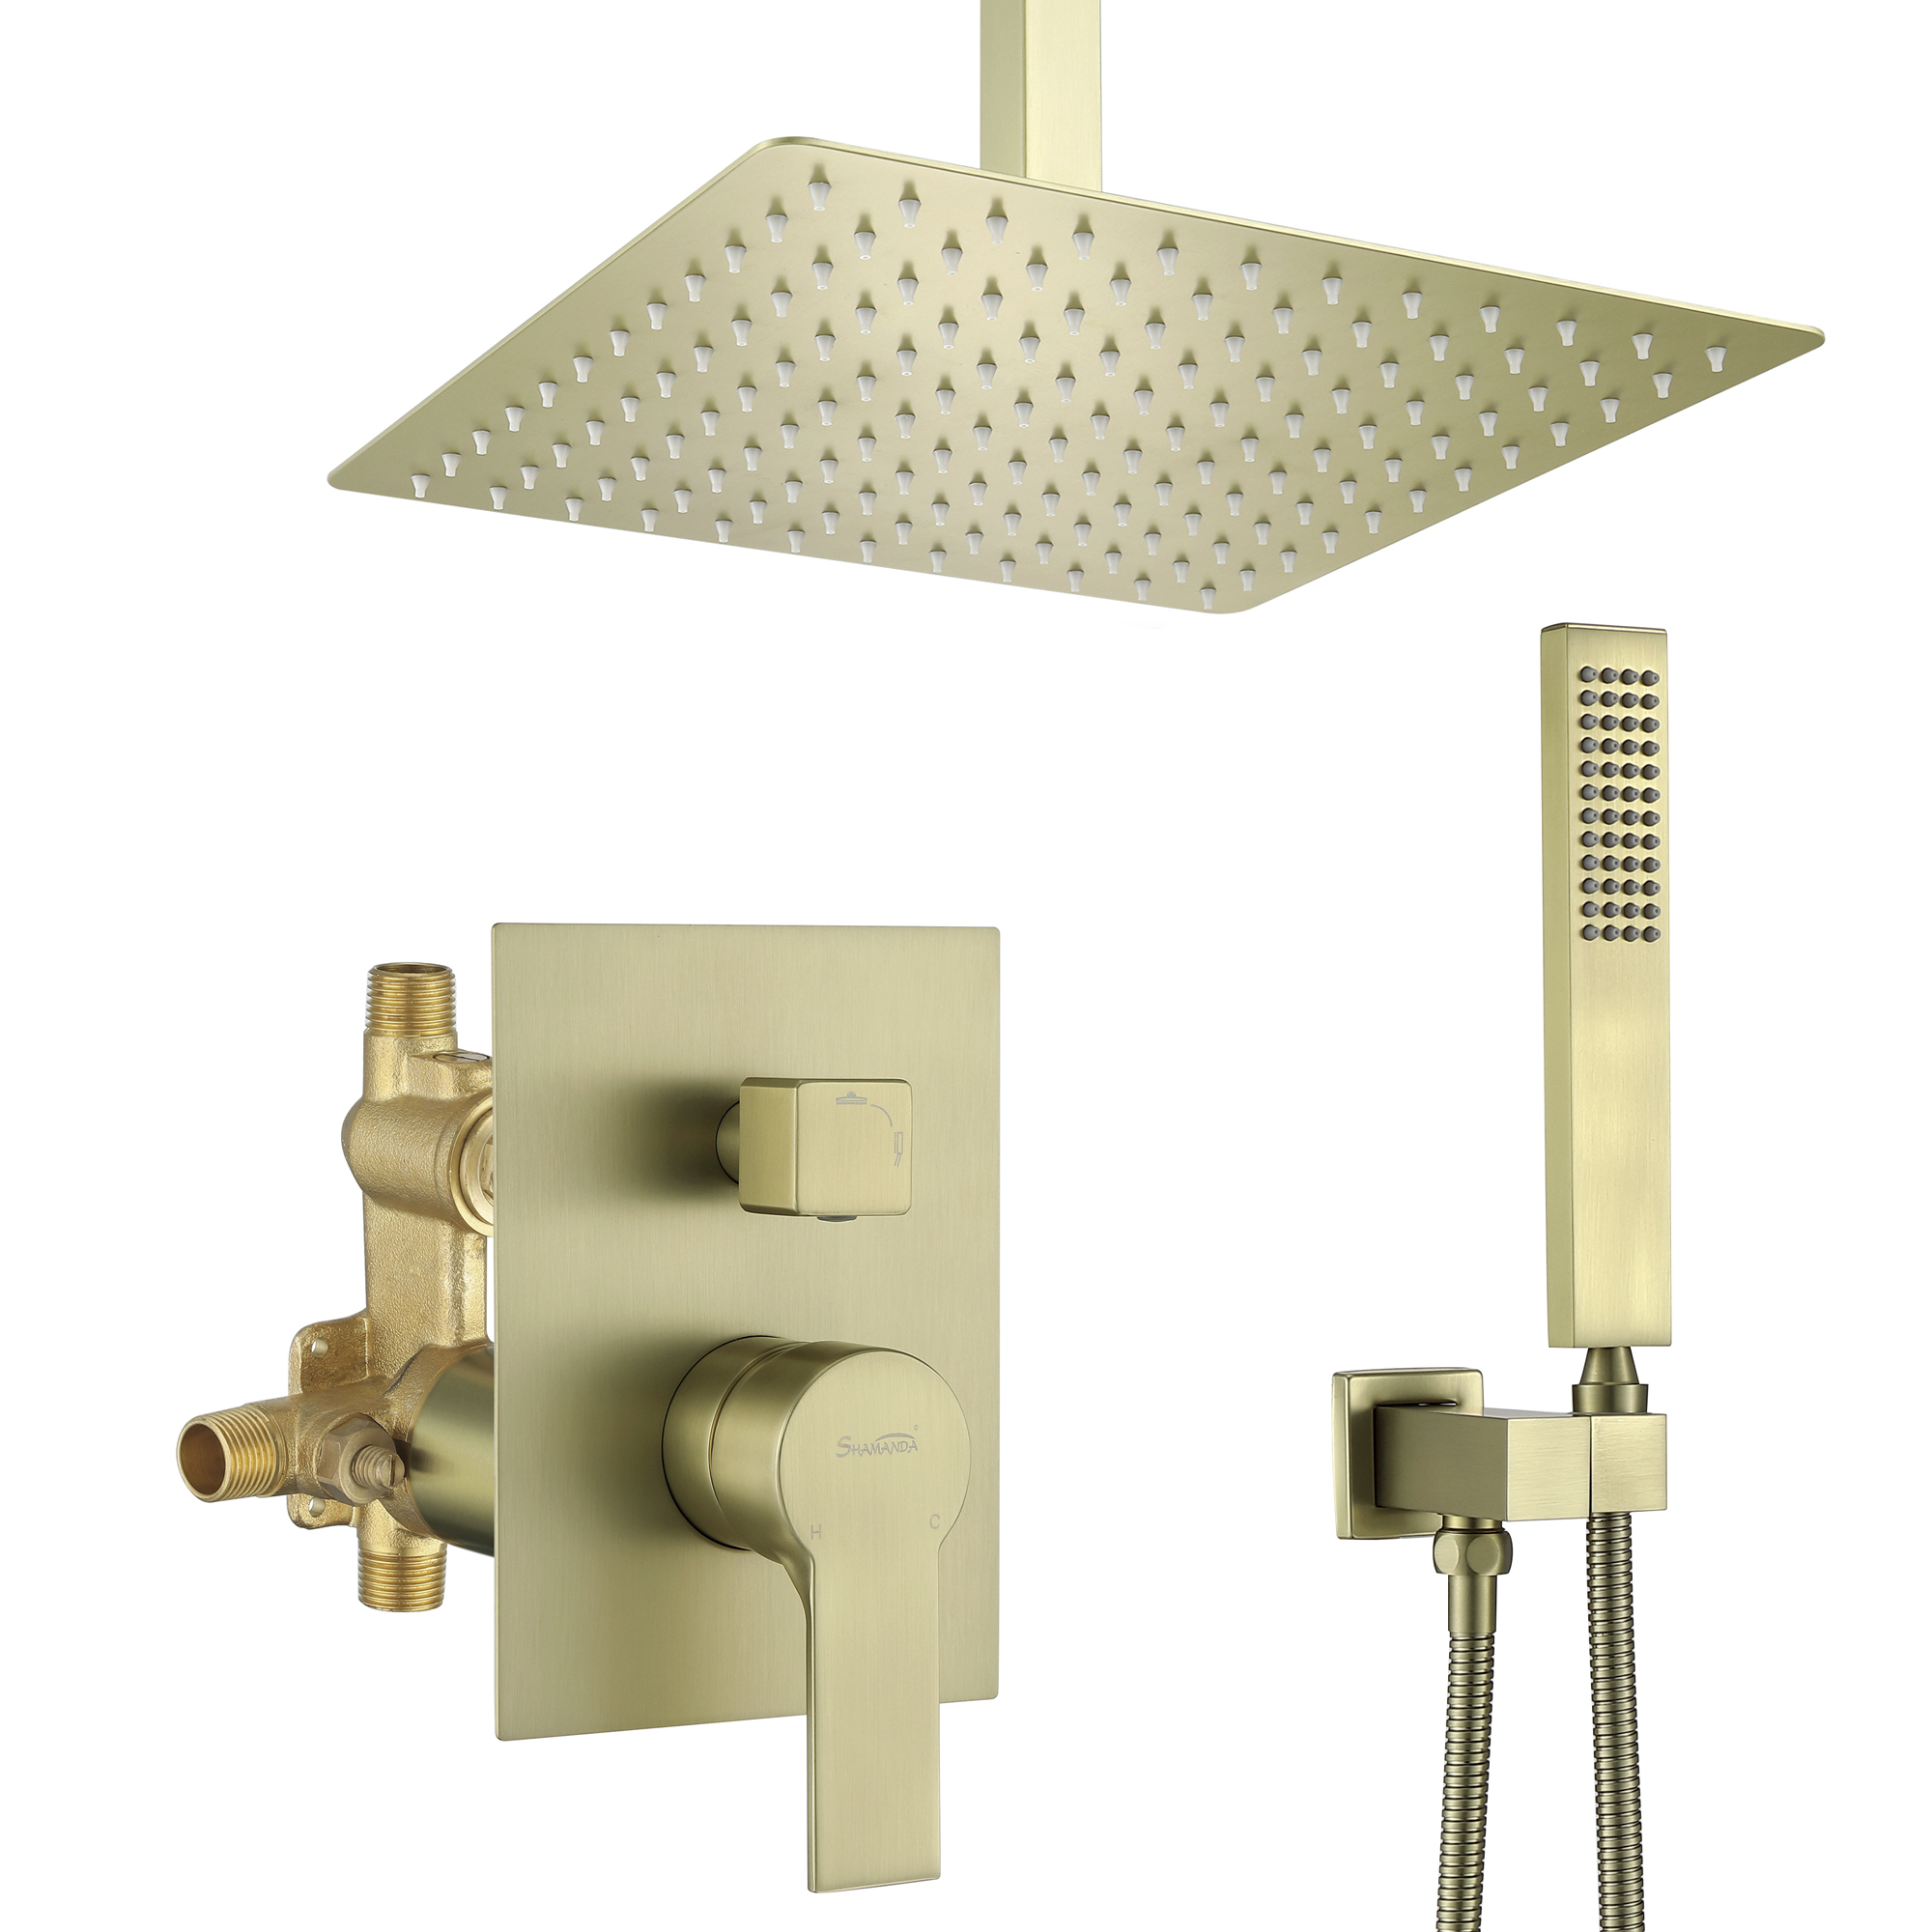 Casainc 2.38 GPM 12-in Ceiling Mounted Shower System with Rough-In Valve Body and Trim (Brushed Gold)-CASAINC